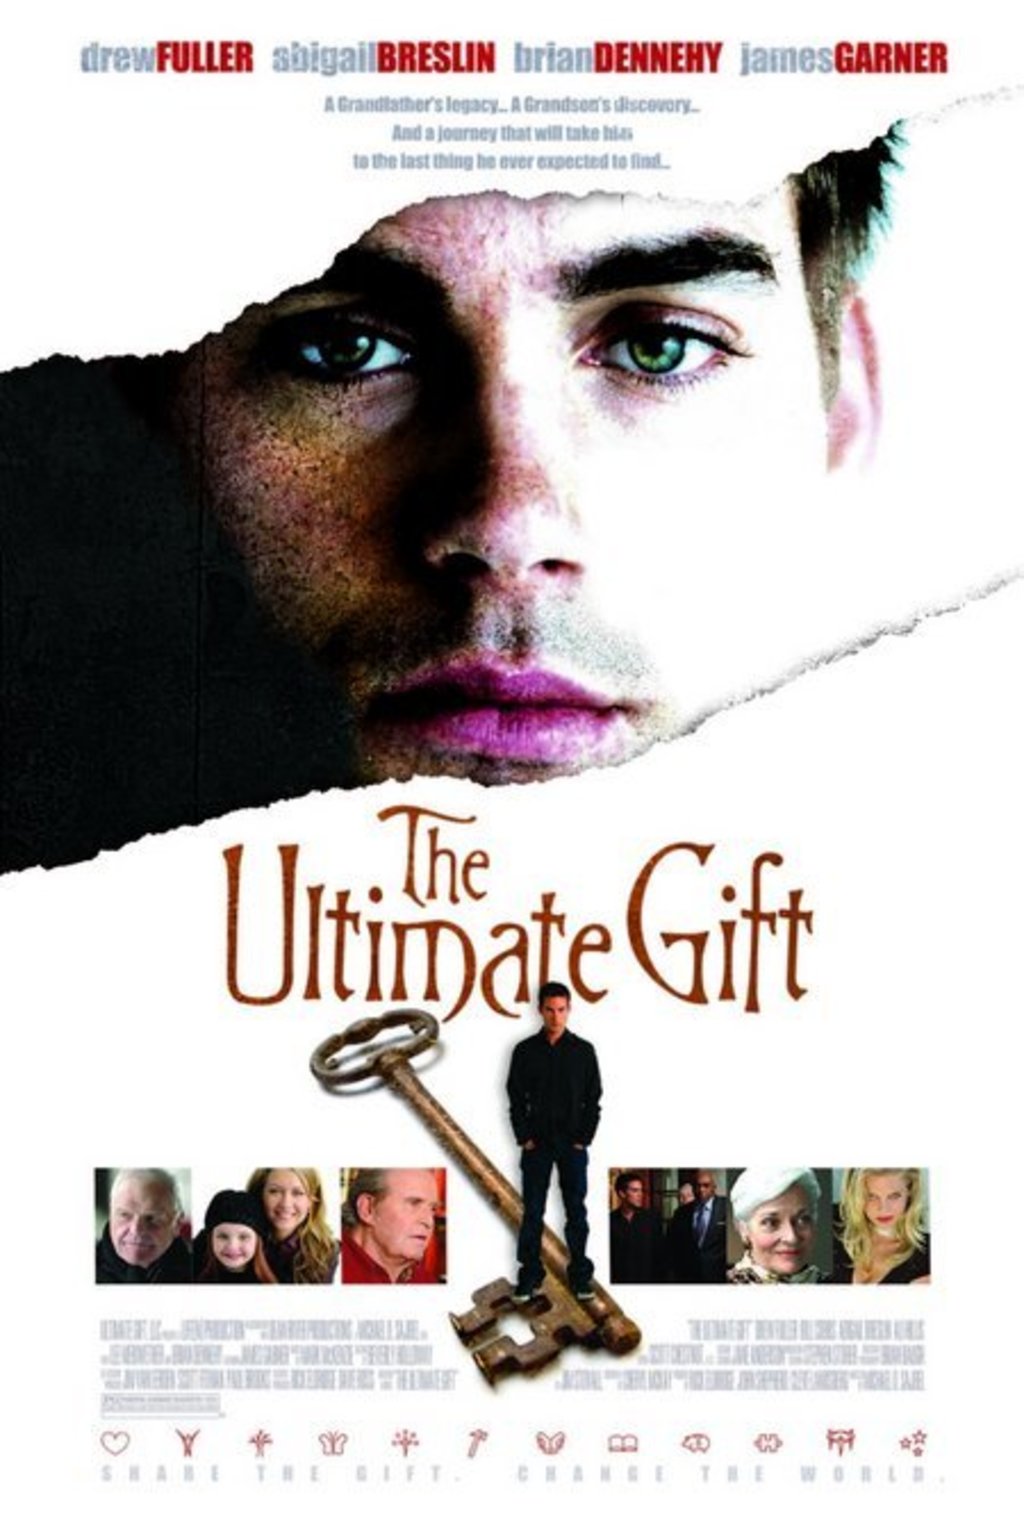 Star power shines in 'The Ultimate Gift' – Orange County Register